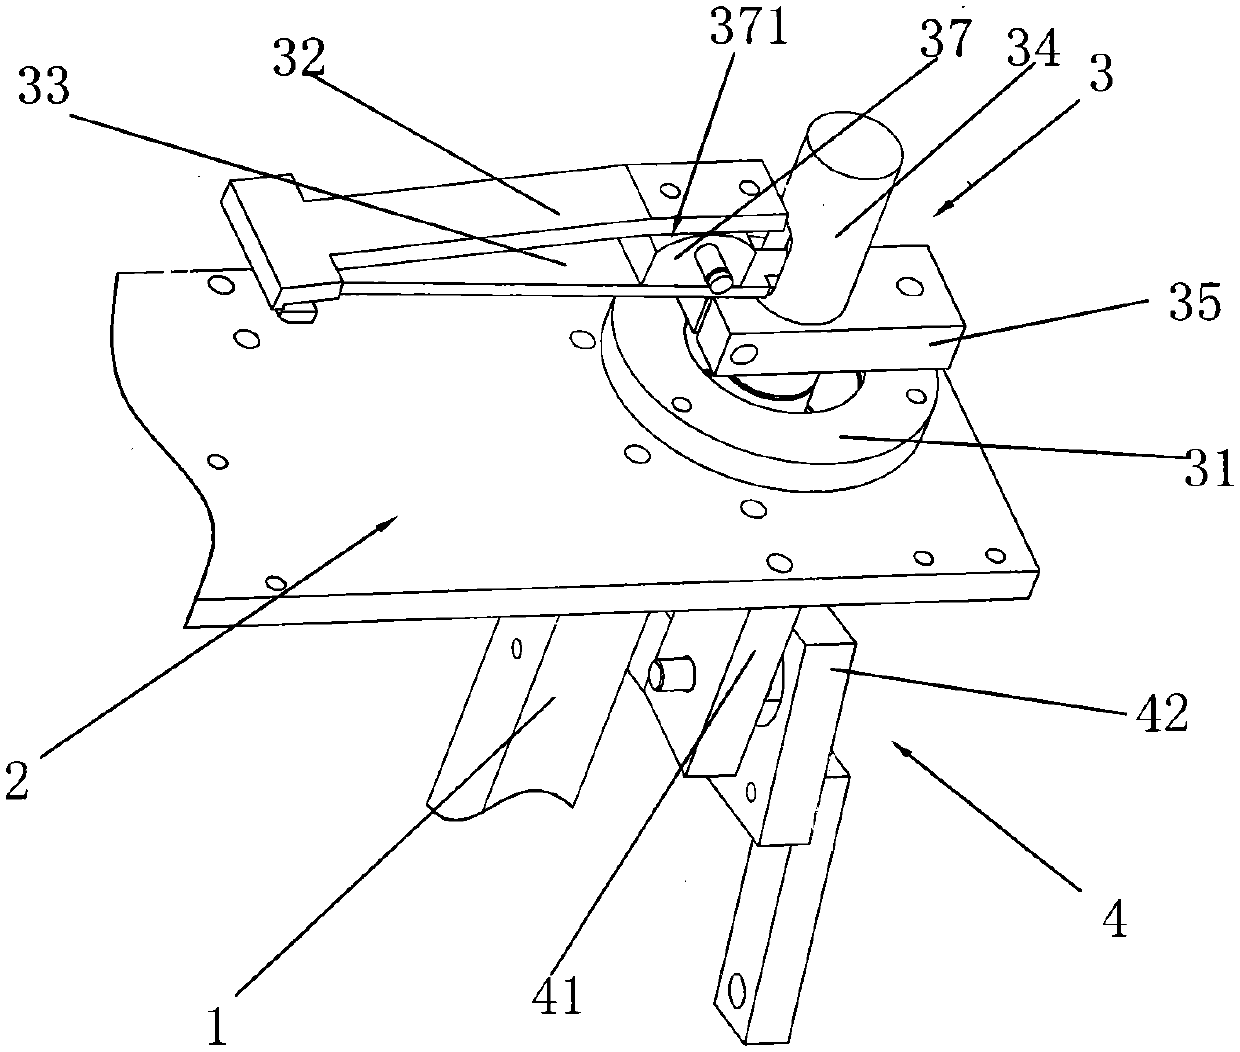 An holding device of a packaging machine origami device